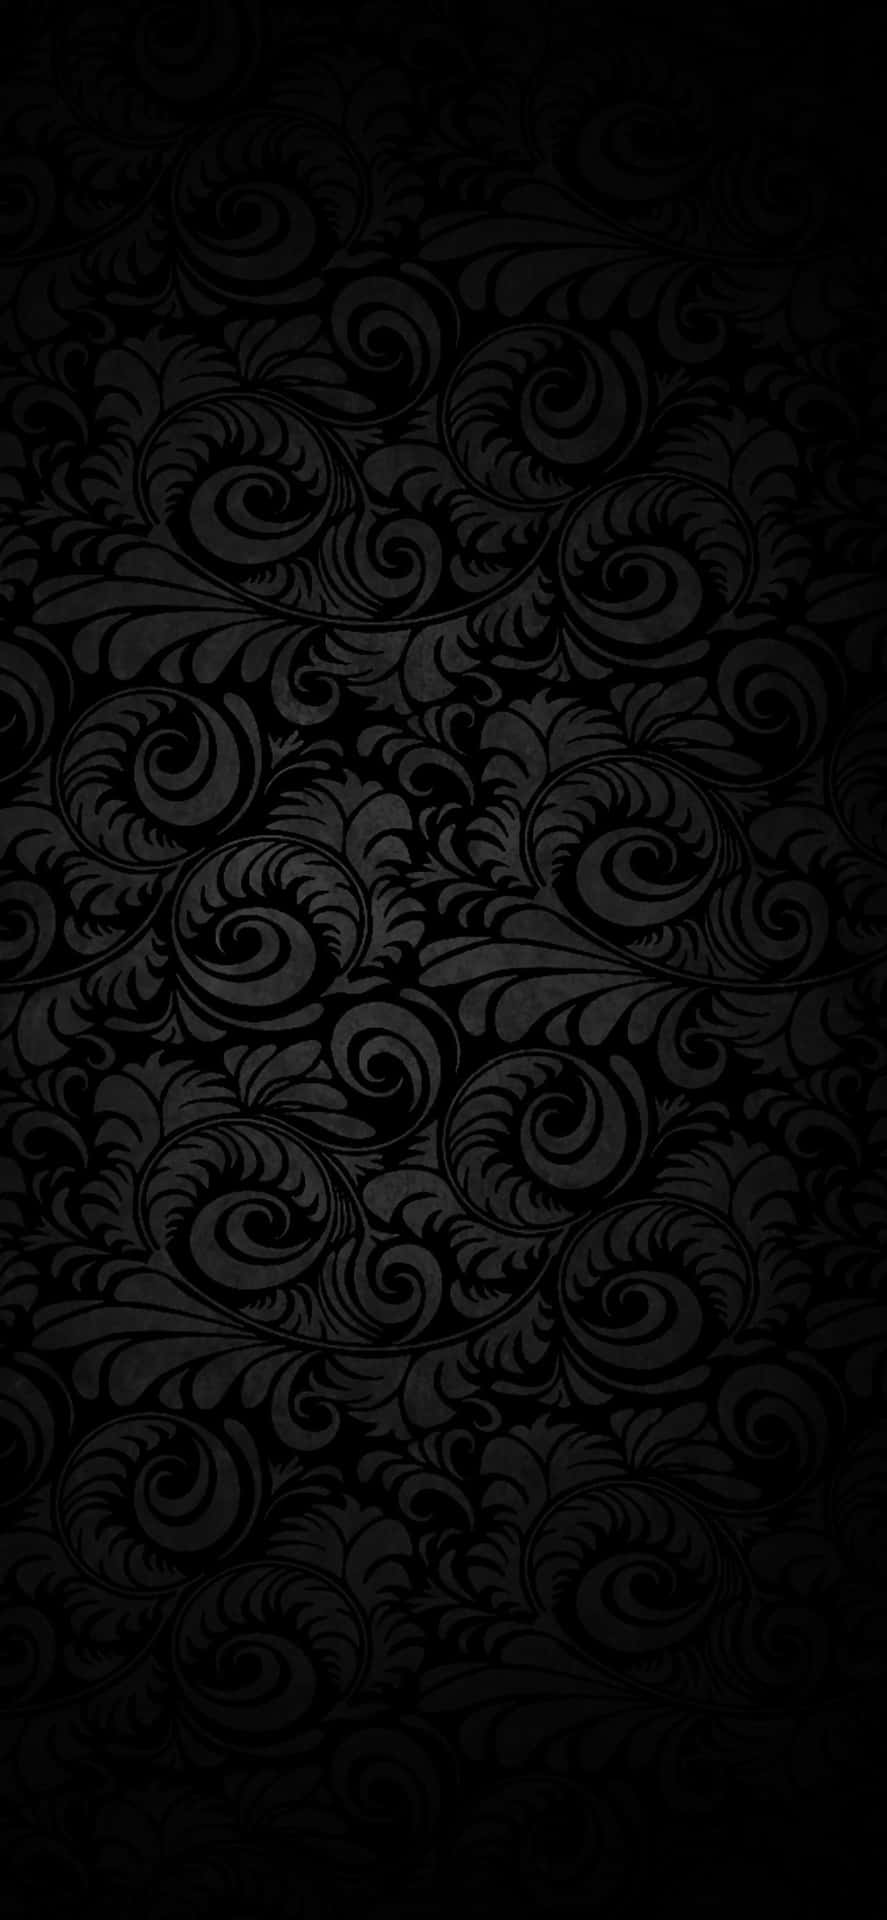 Iphone 12 Pro Max Background